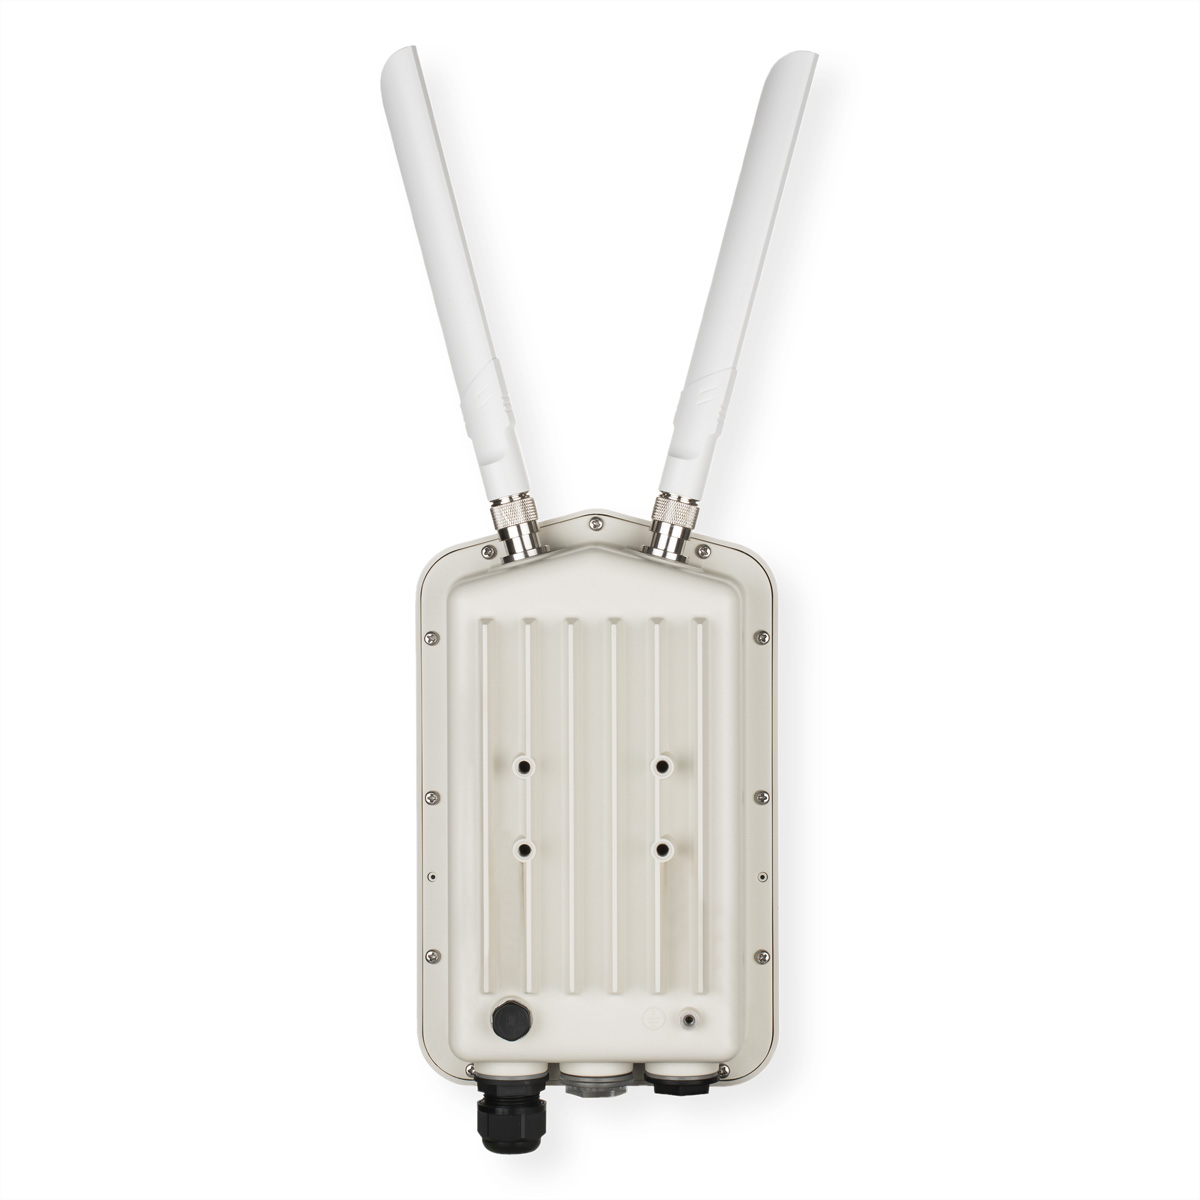 Dual Unified Access Point Access DWL-8720AP Outdoor D-LINK Gbit/s 1,3 AC1300 2 Band Wave Point